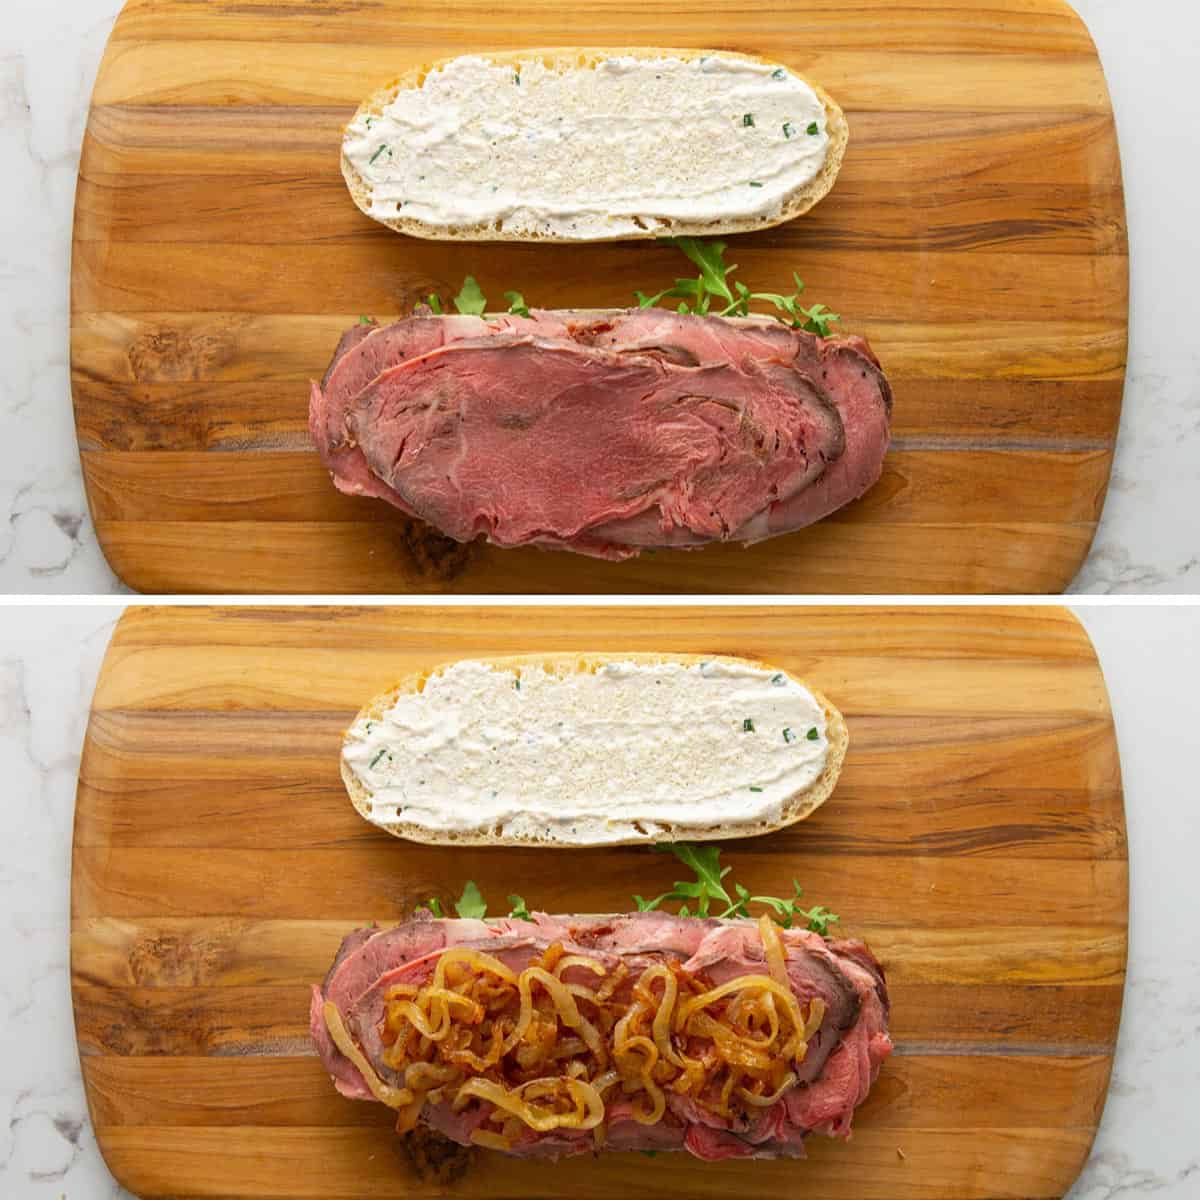 A collage of two images showing steps of how to make a prime rib sandwich.